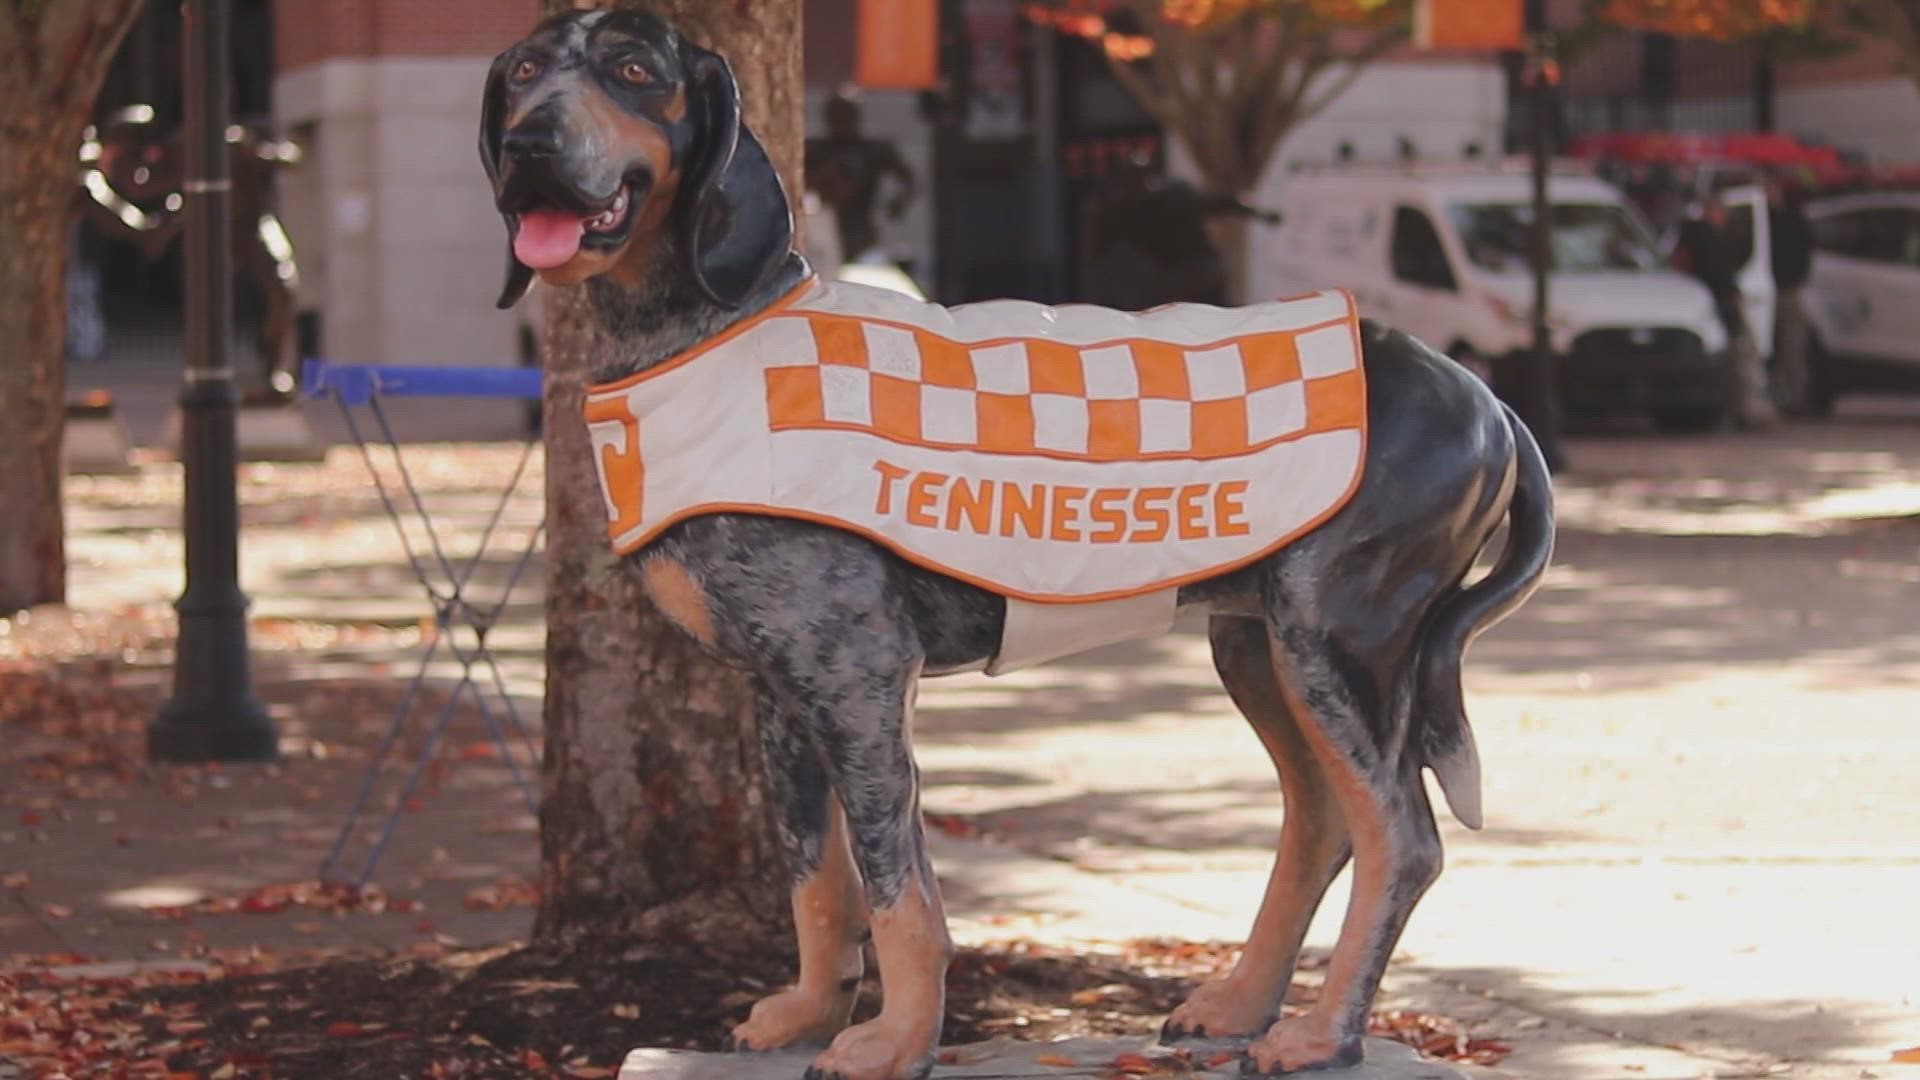 UT's beloved mascot witnessed his first ever win against Alabama after nine years of service to the team.